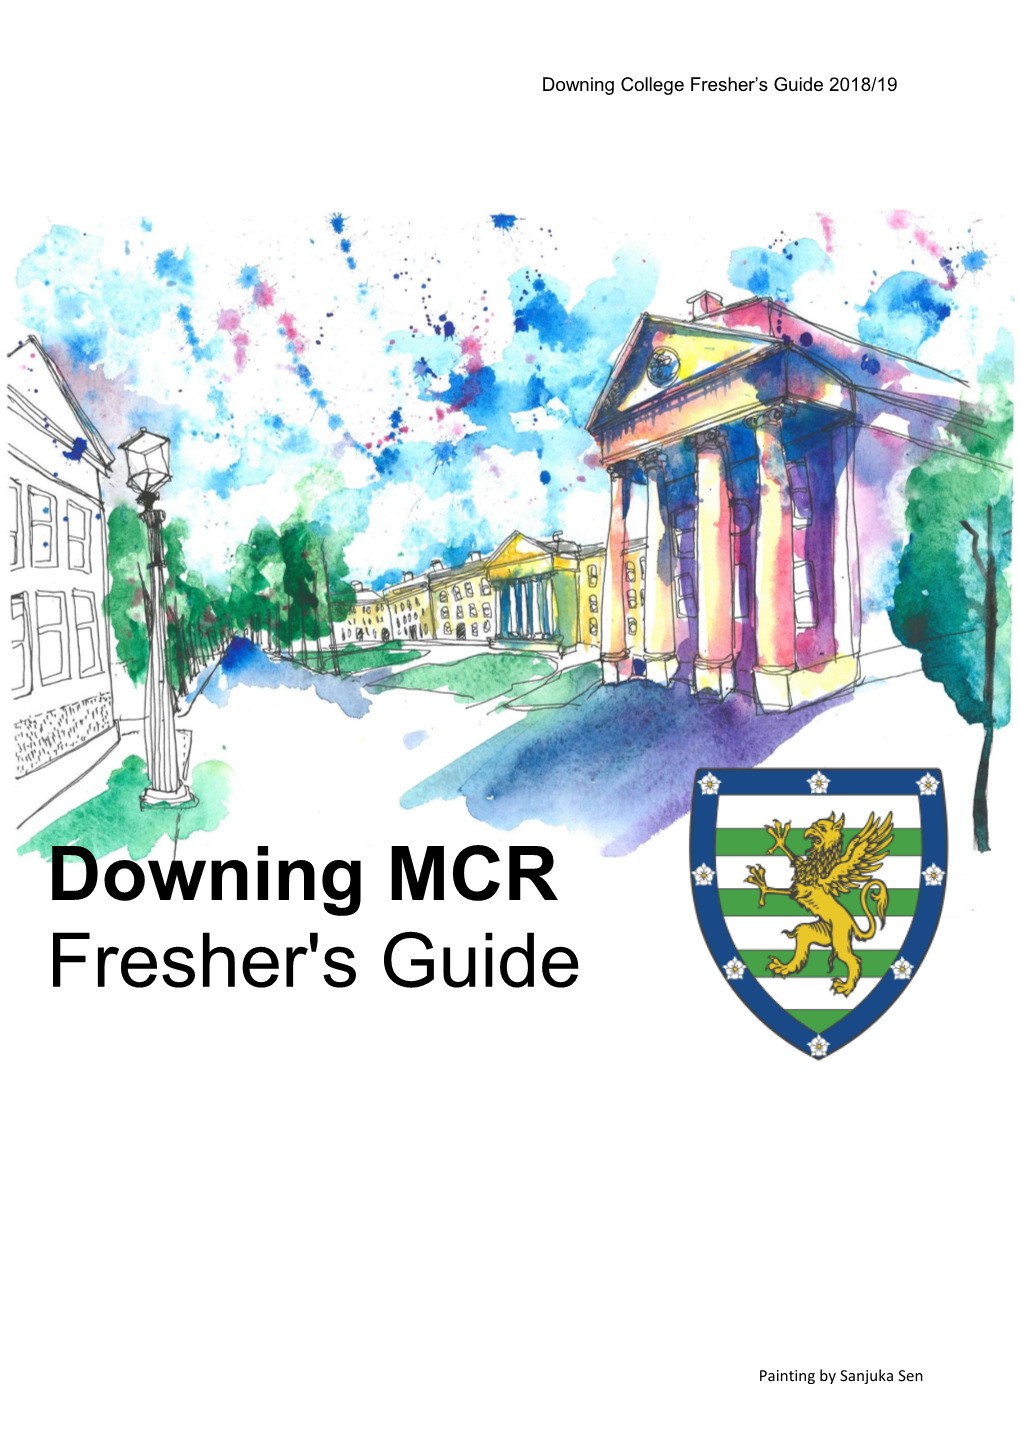 Downing MCR Fresher's Guide